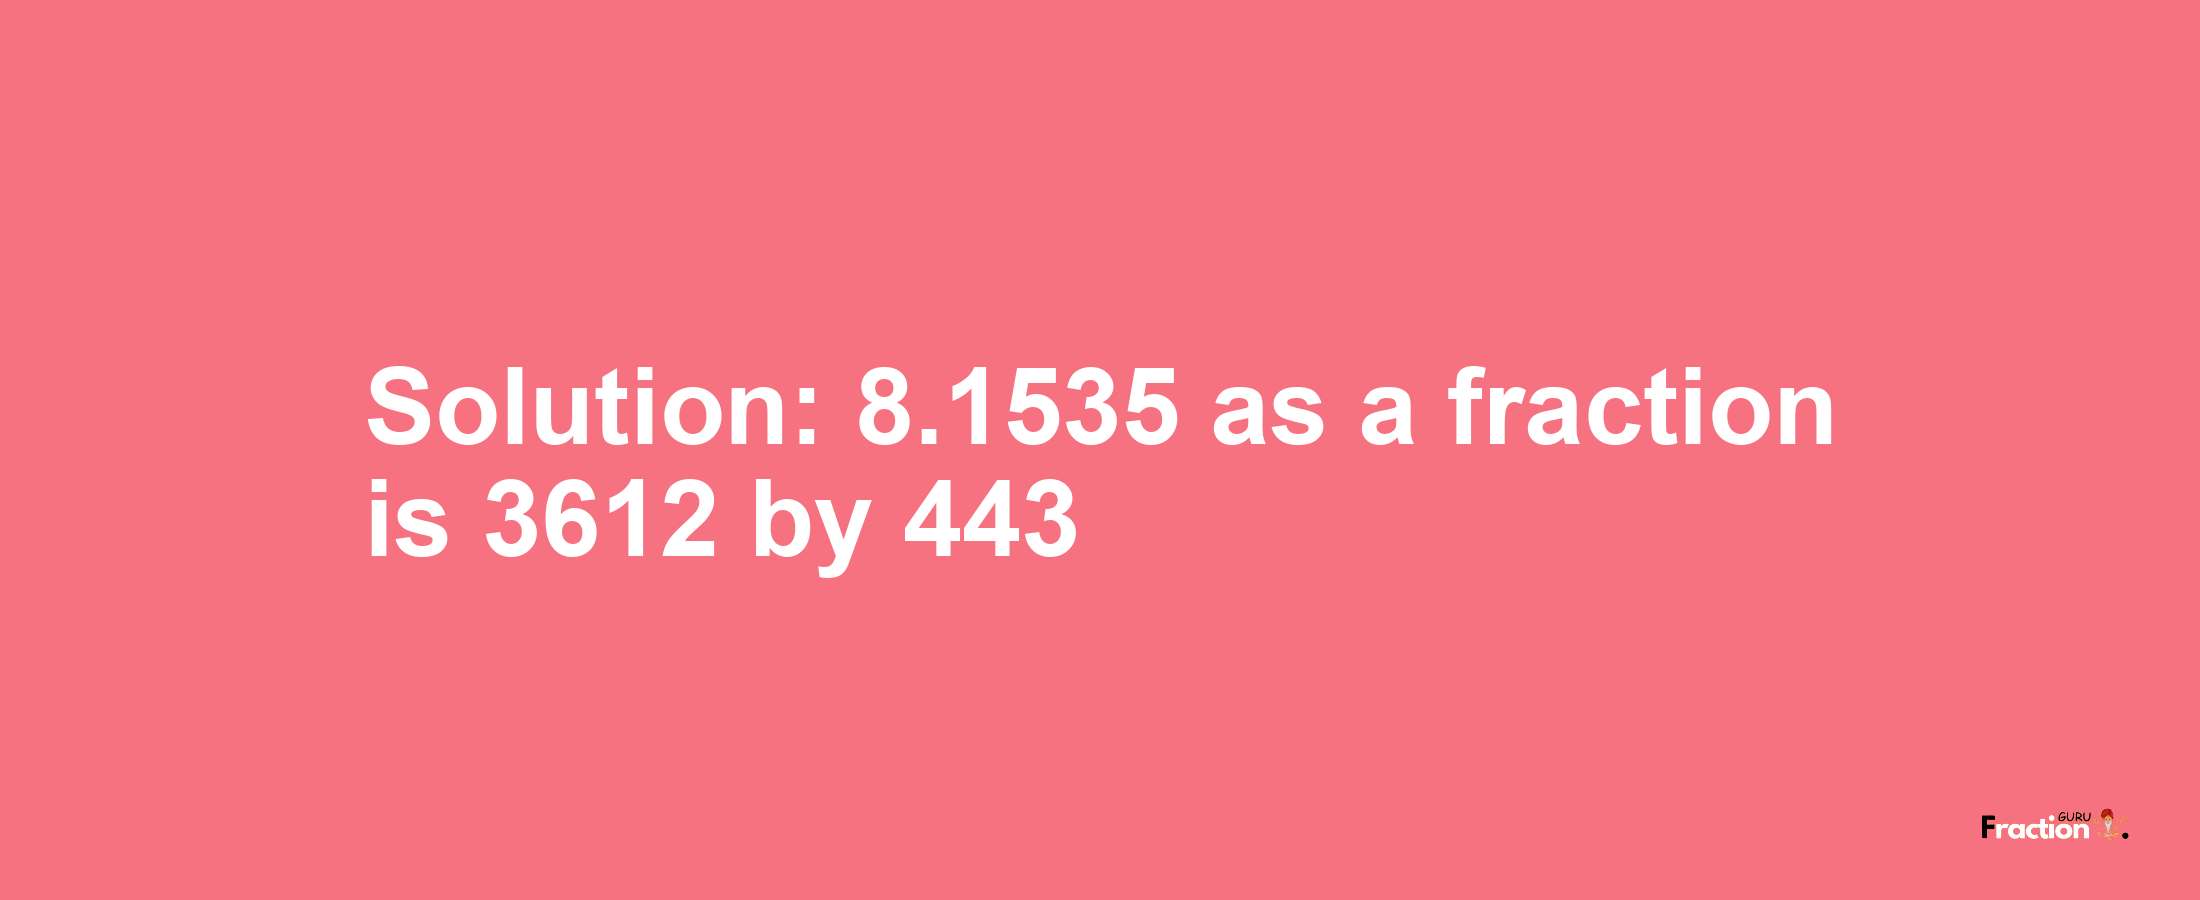 Solution:8.1535 as a fraction is 3612/443